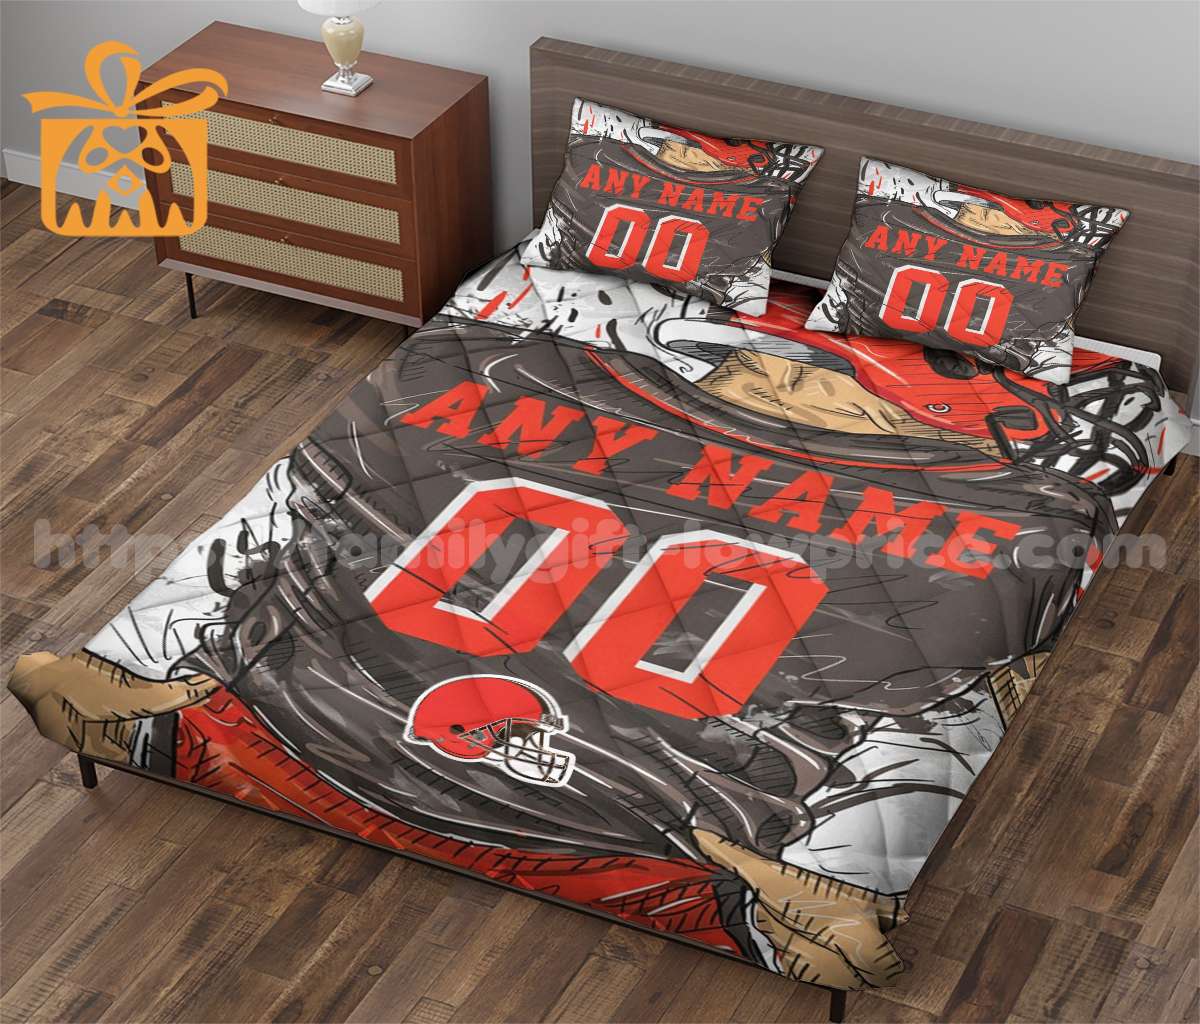 Cleveland Browns Jerseys Quilt Bedding Sets, Browns Gifts, Personalized NFL Jerseys with Your Name & Number